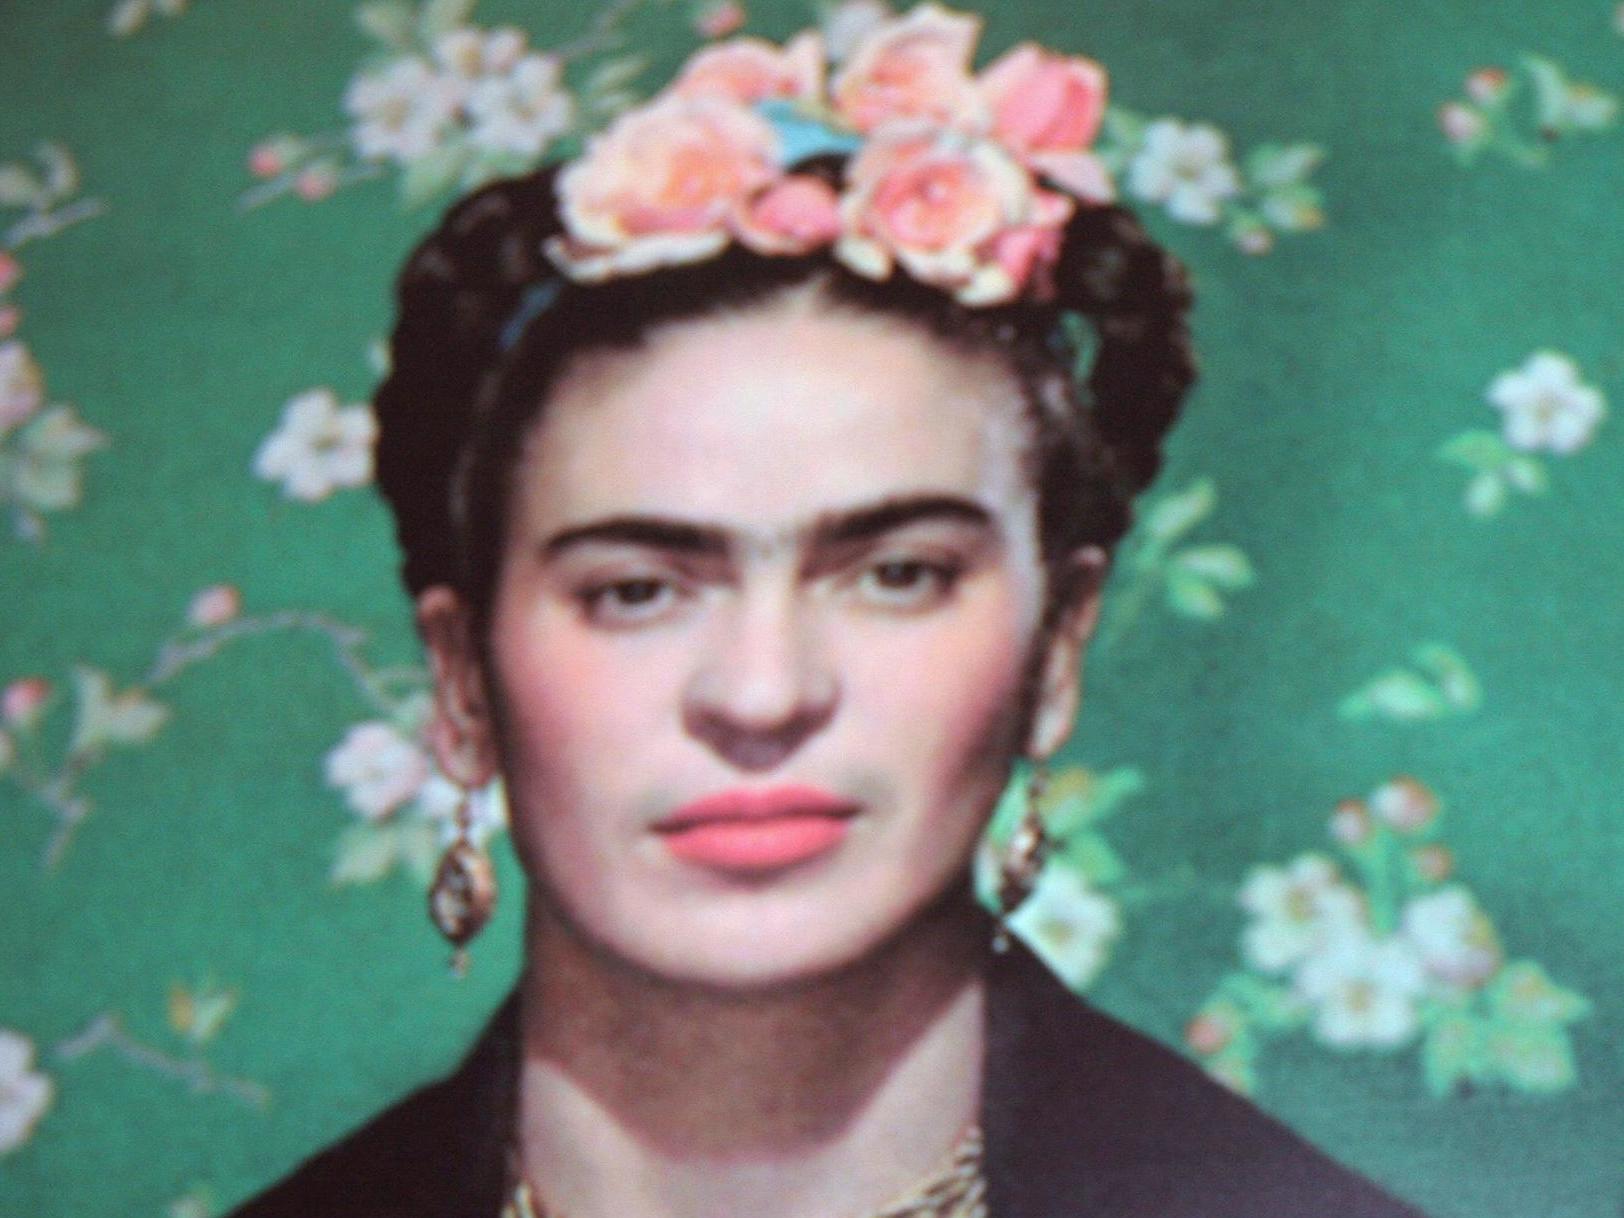 Frida Kahlo is widely considered a Mexican icon